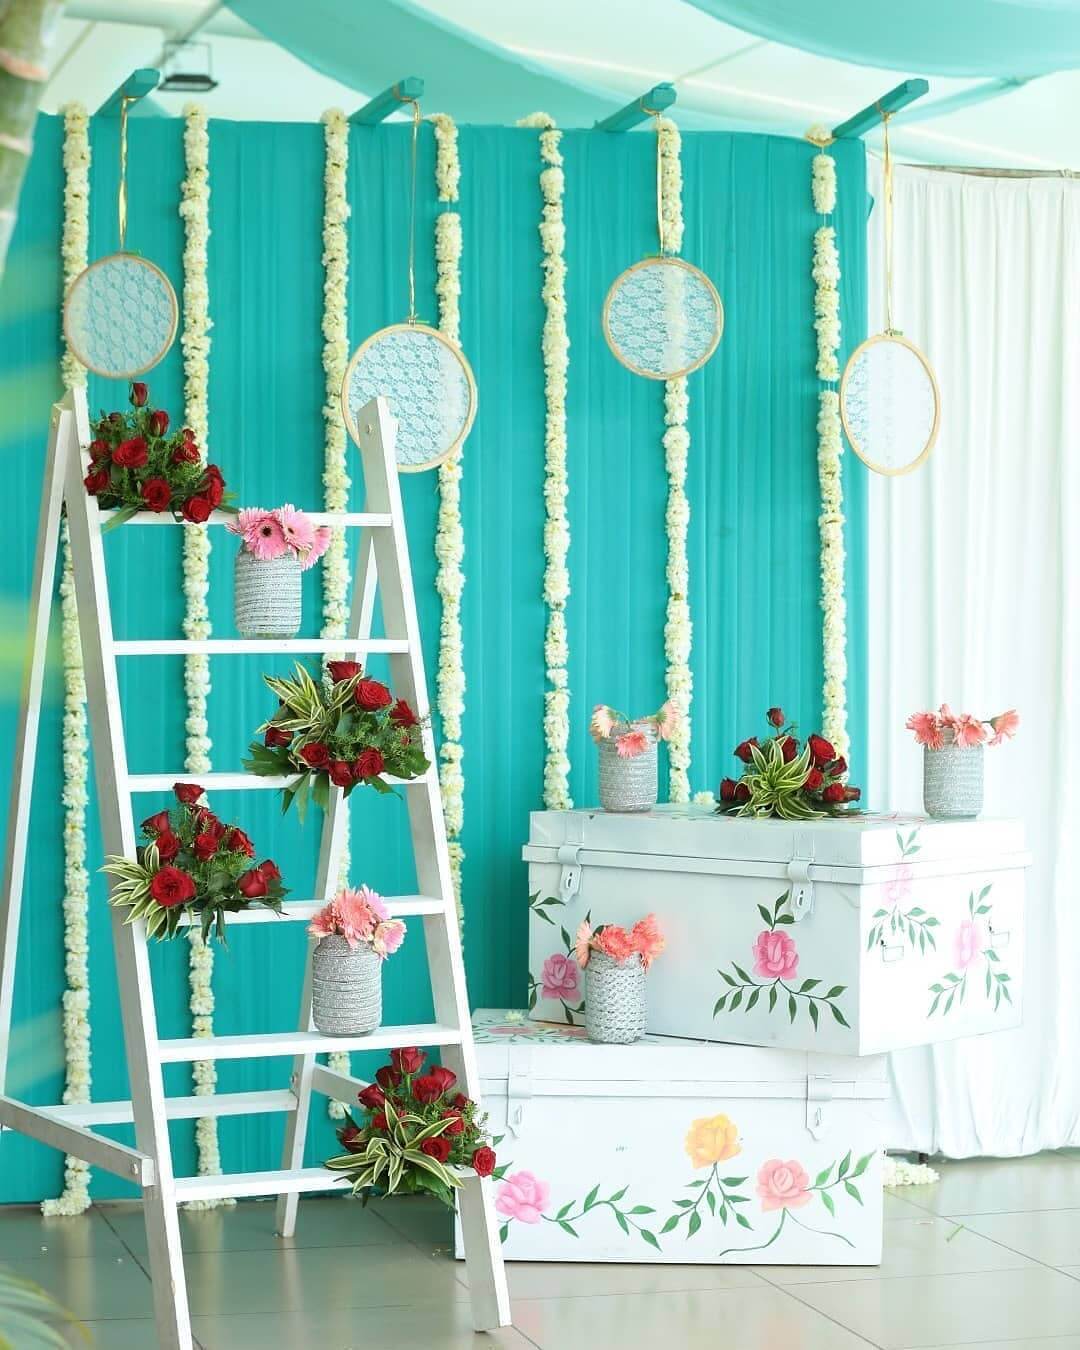 Haldi Function Decor Ideas That Include Colorful Trunks